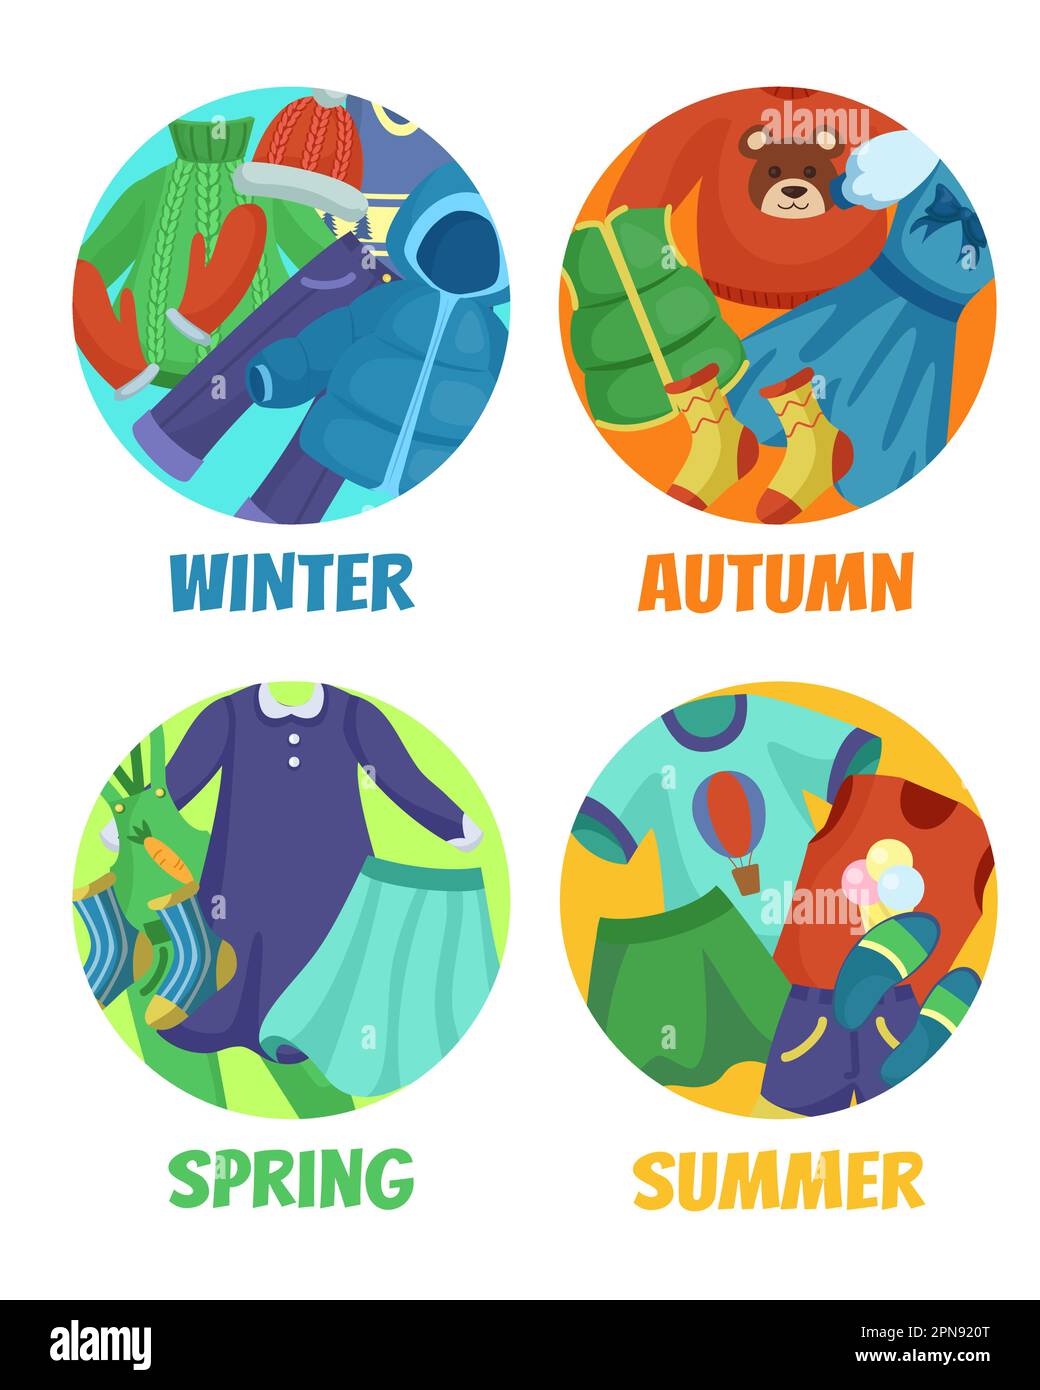 Kids clothes for different seasons cartoon illustrations set Stock ...